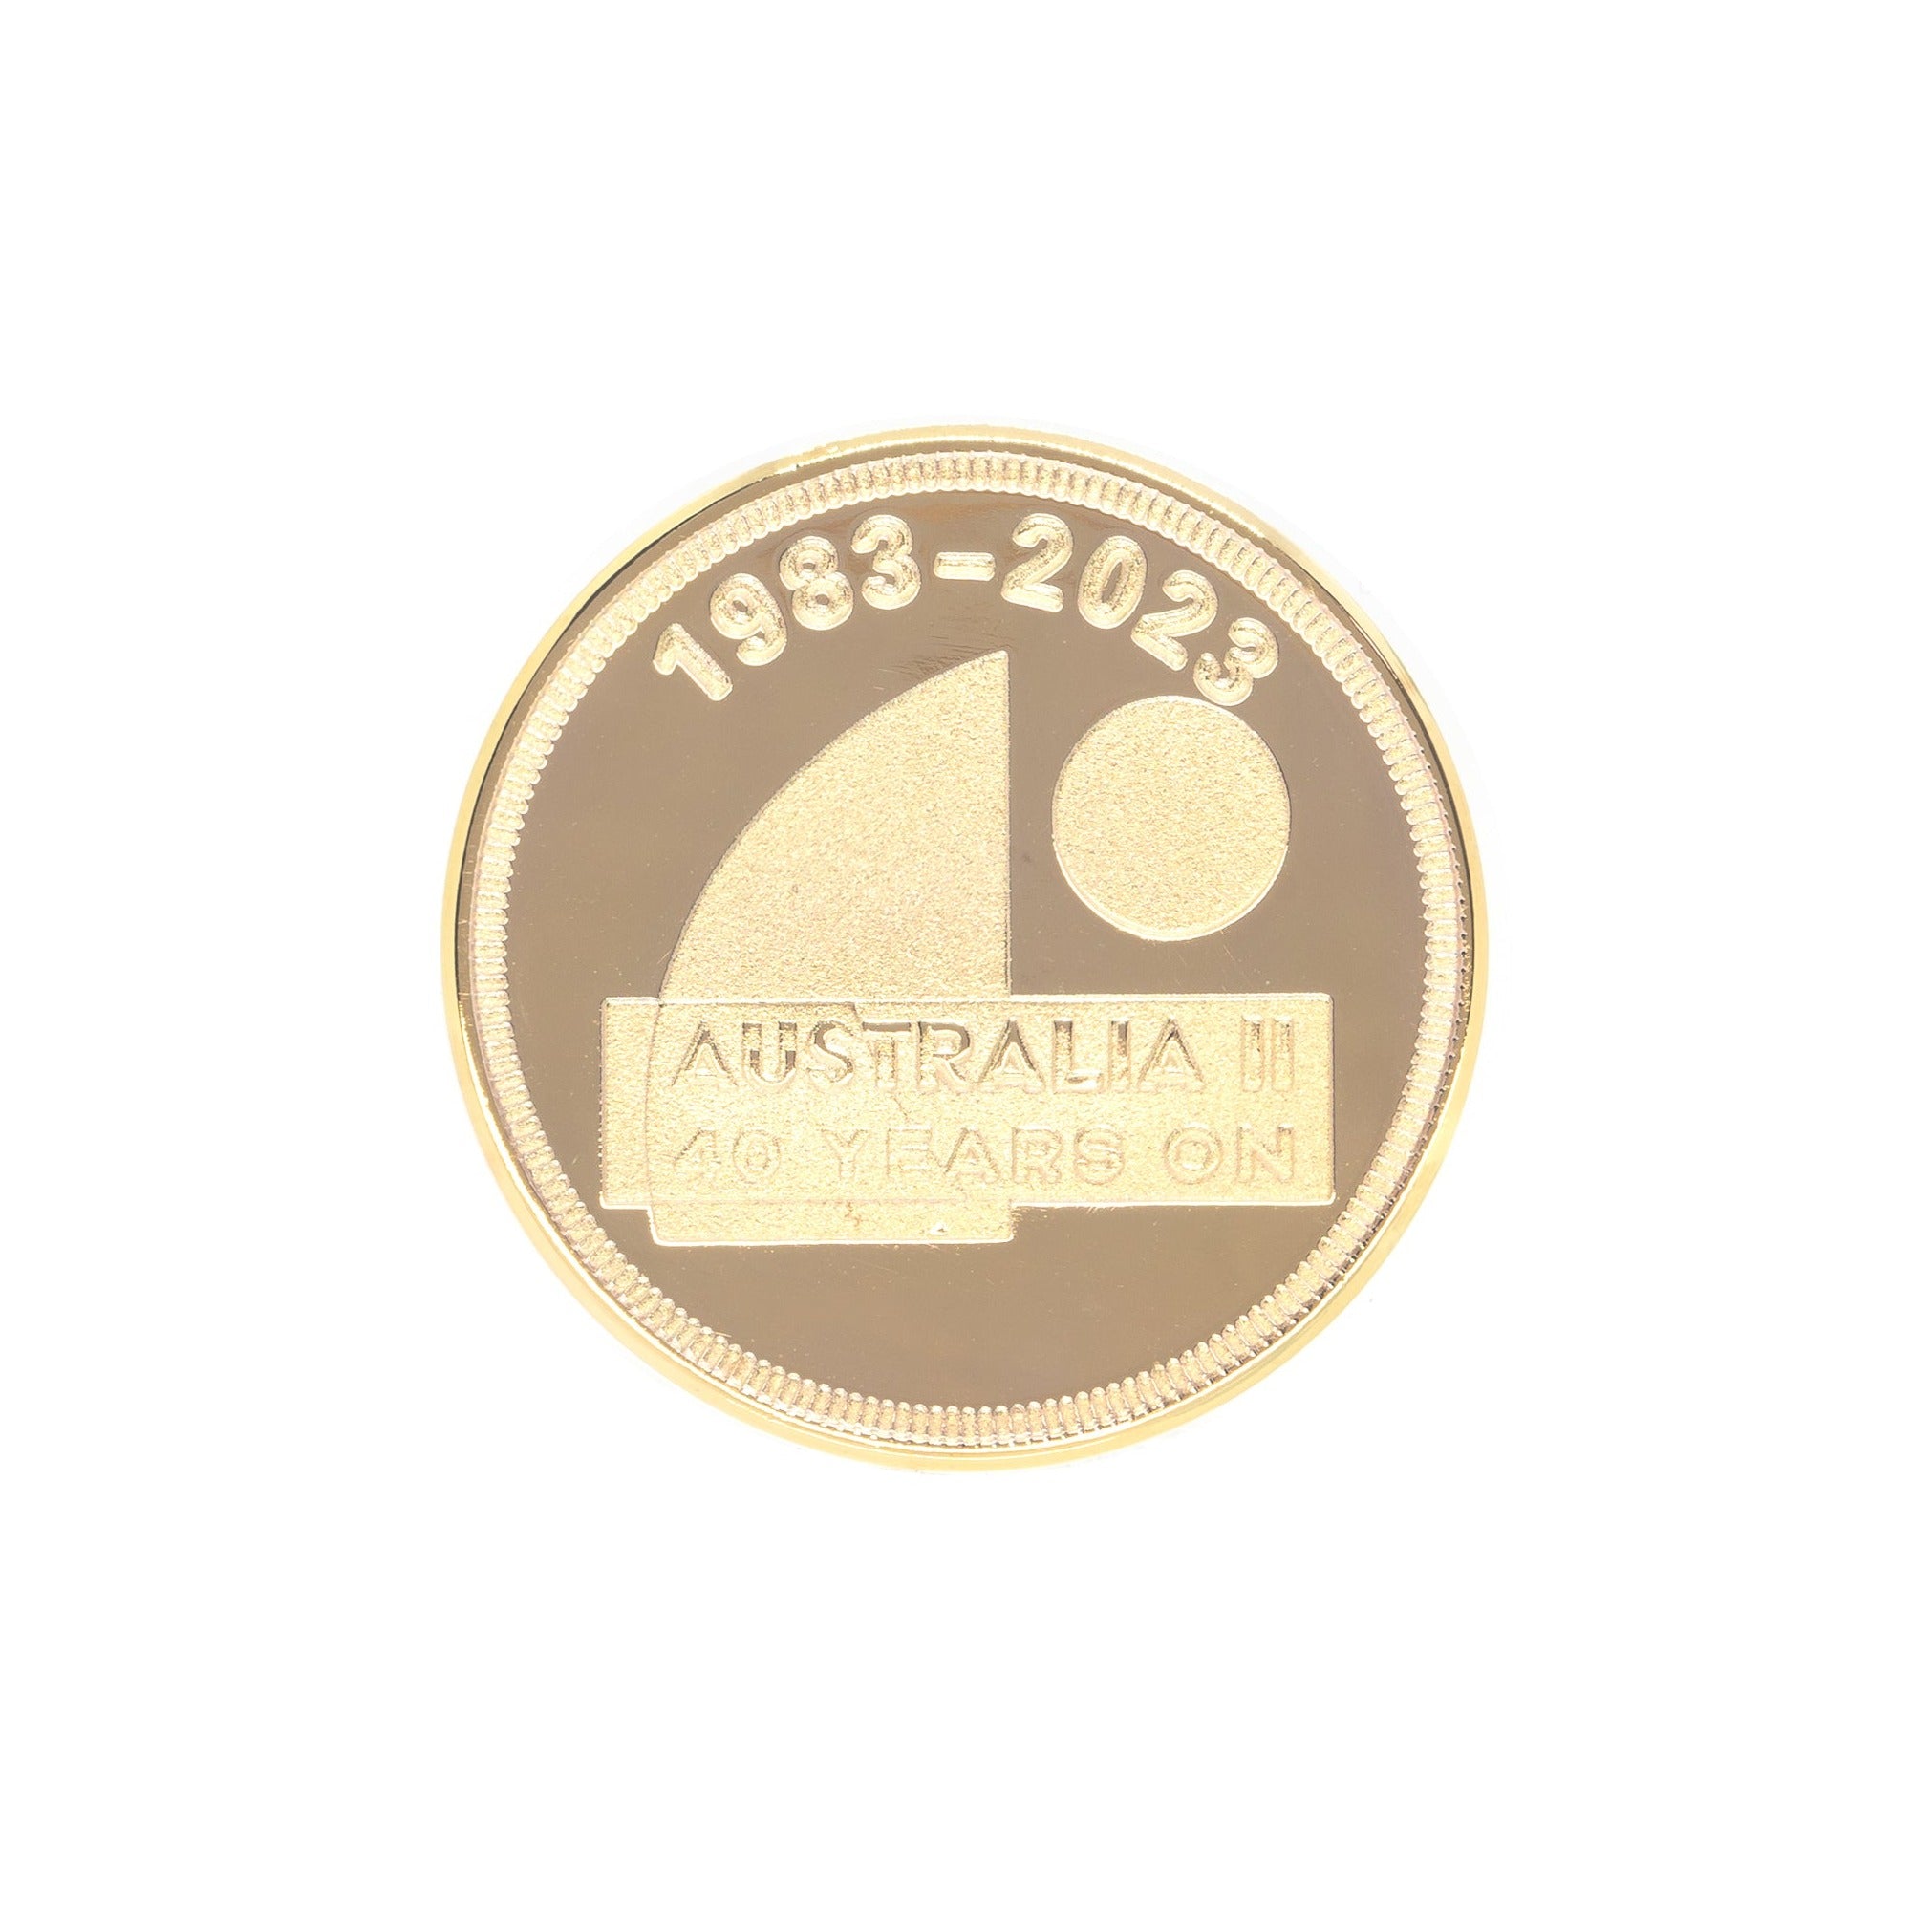 Australia II 40 Years ON Gold Plated Souvenir Coin collectable